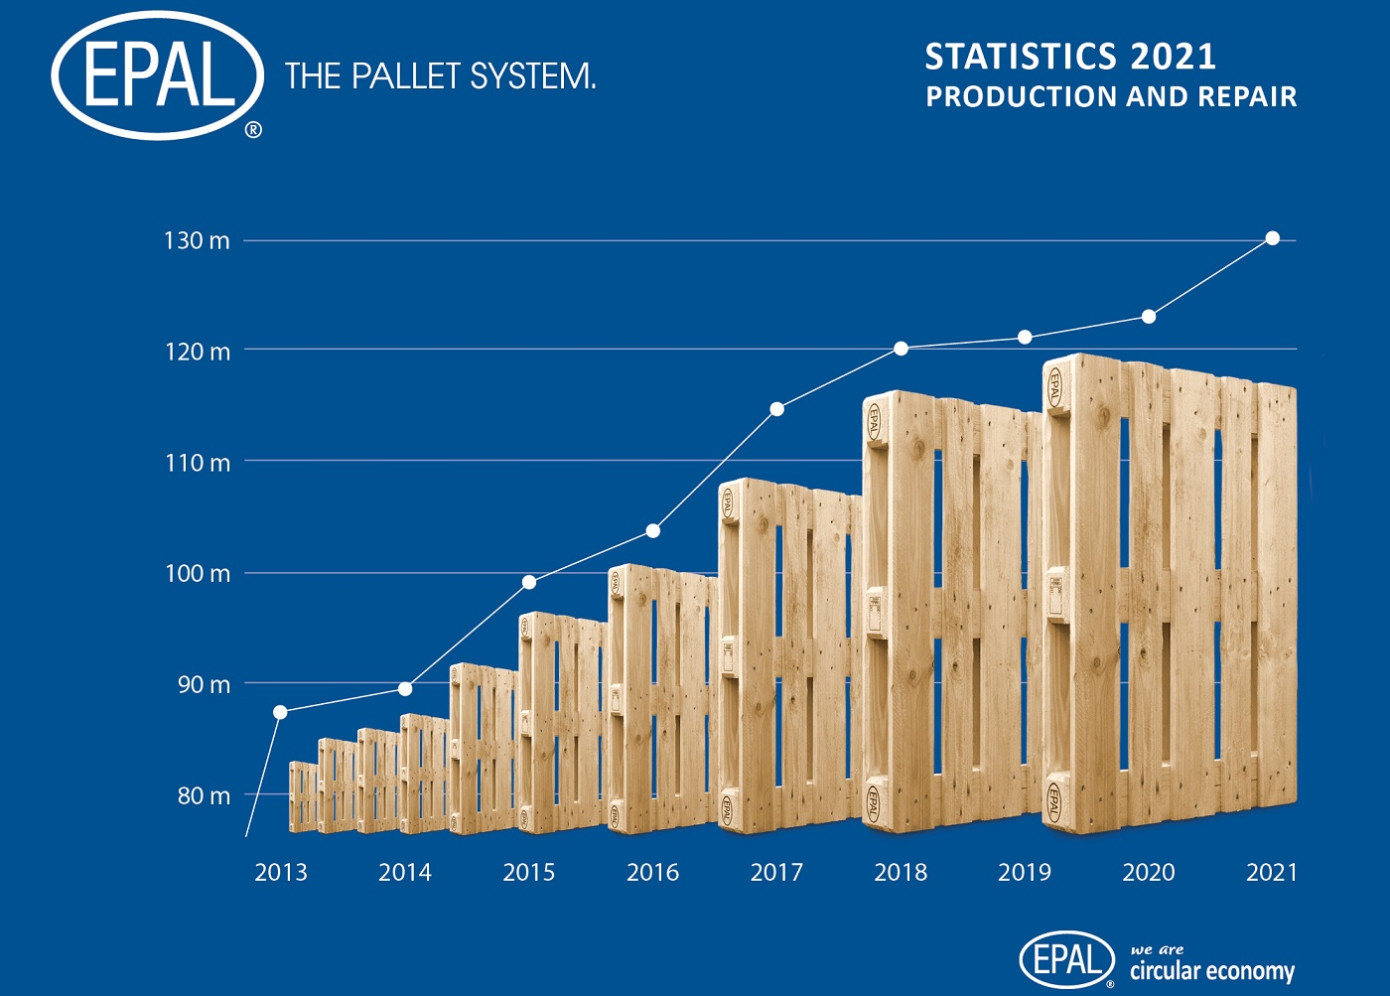 EPAL pallet production reaches record levels in 2021